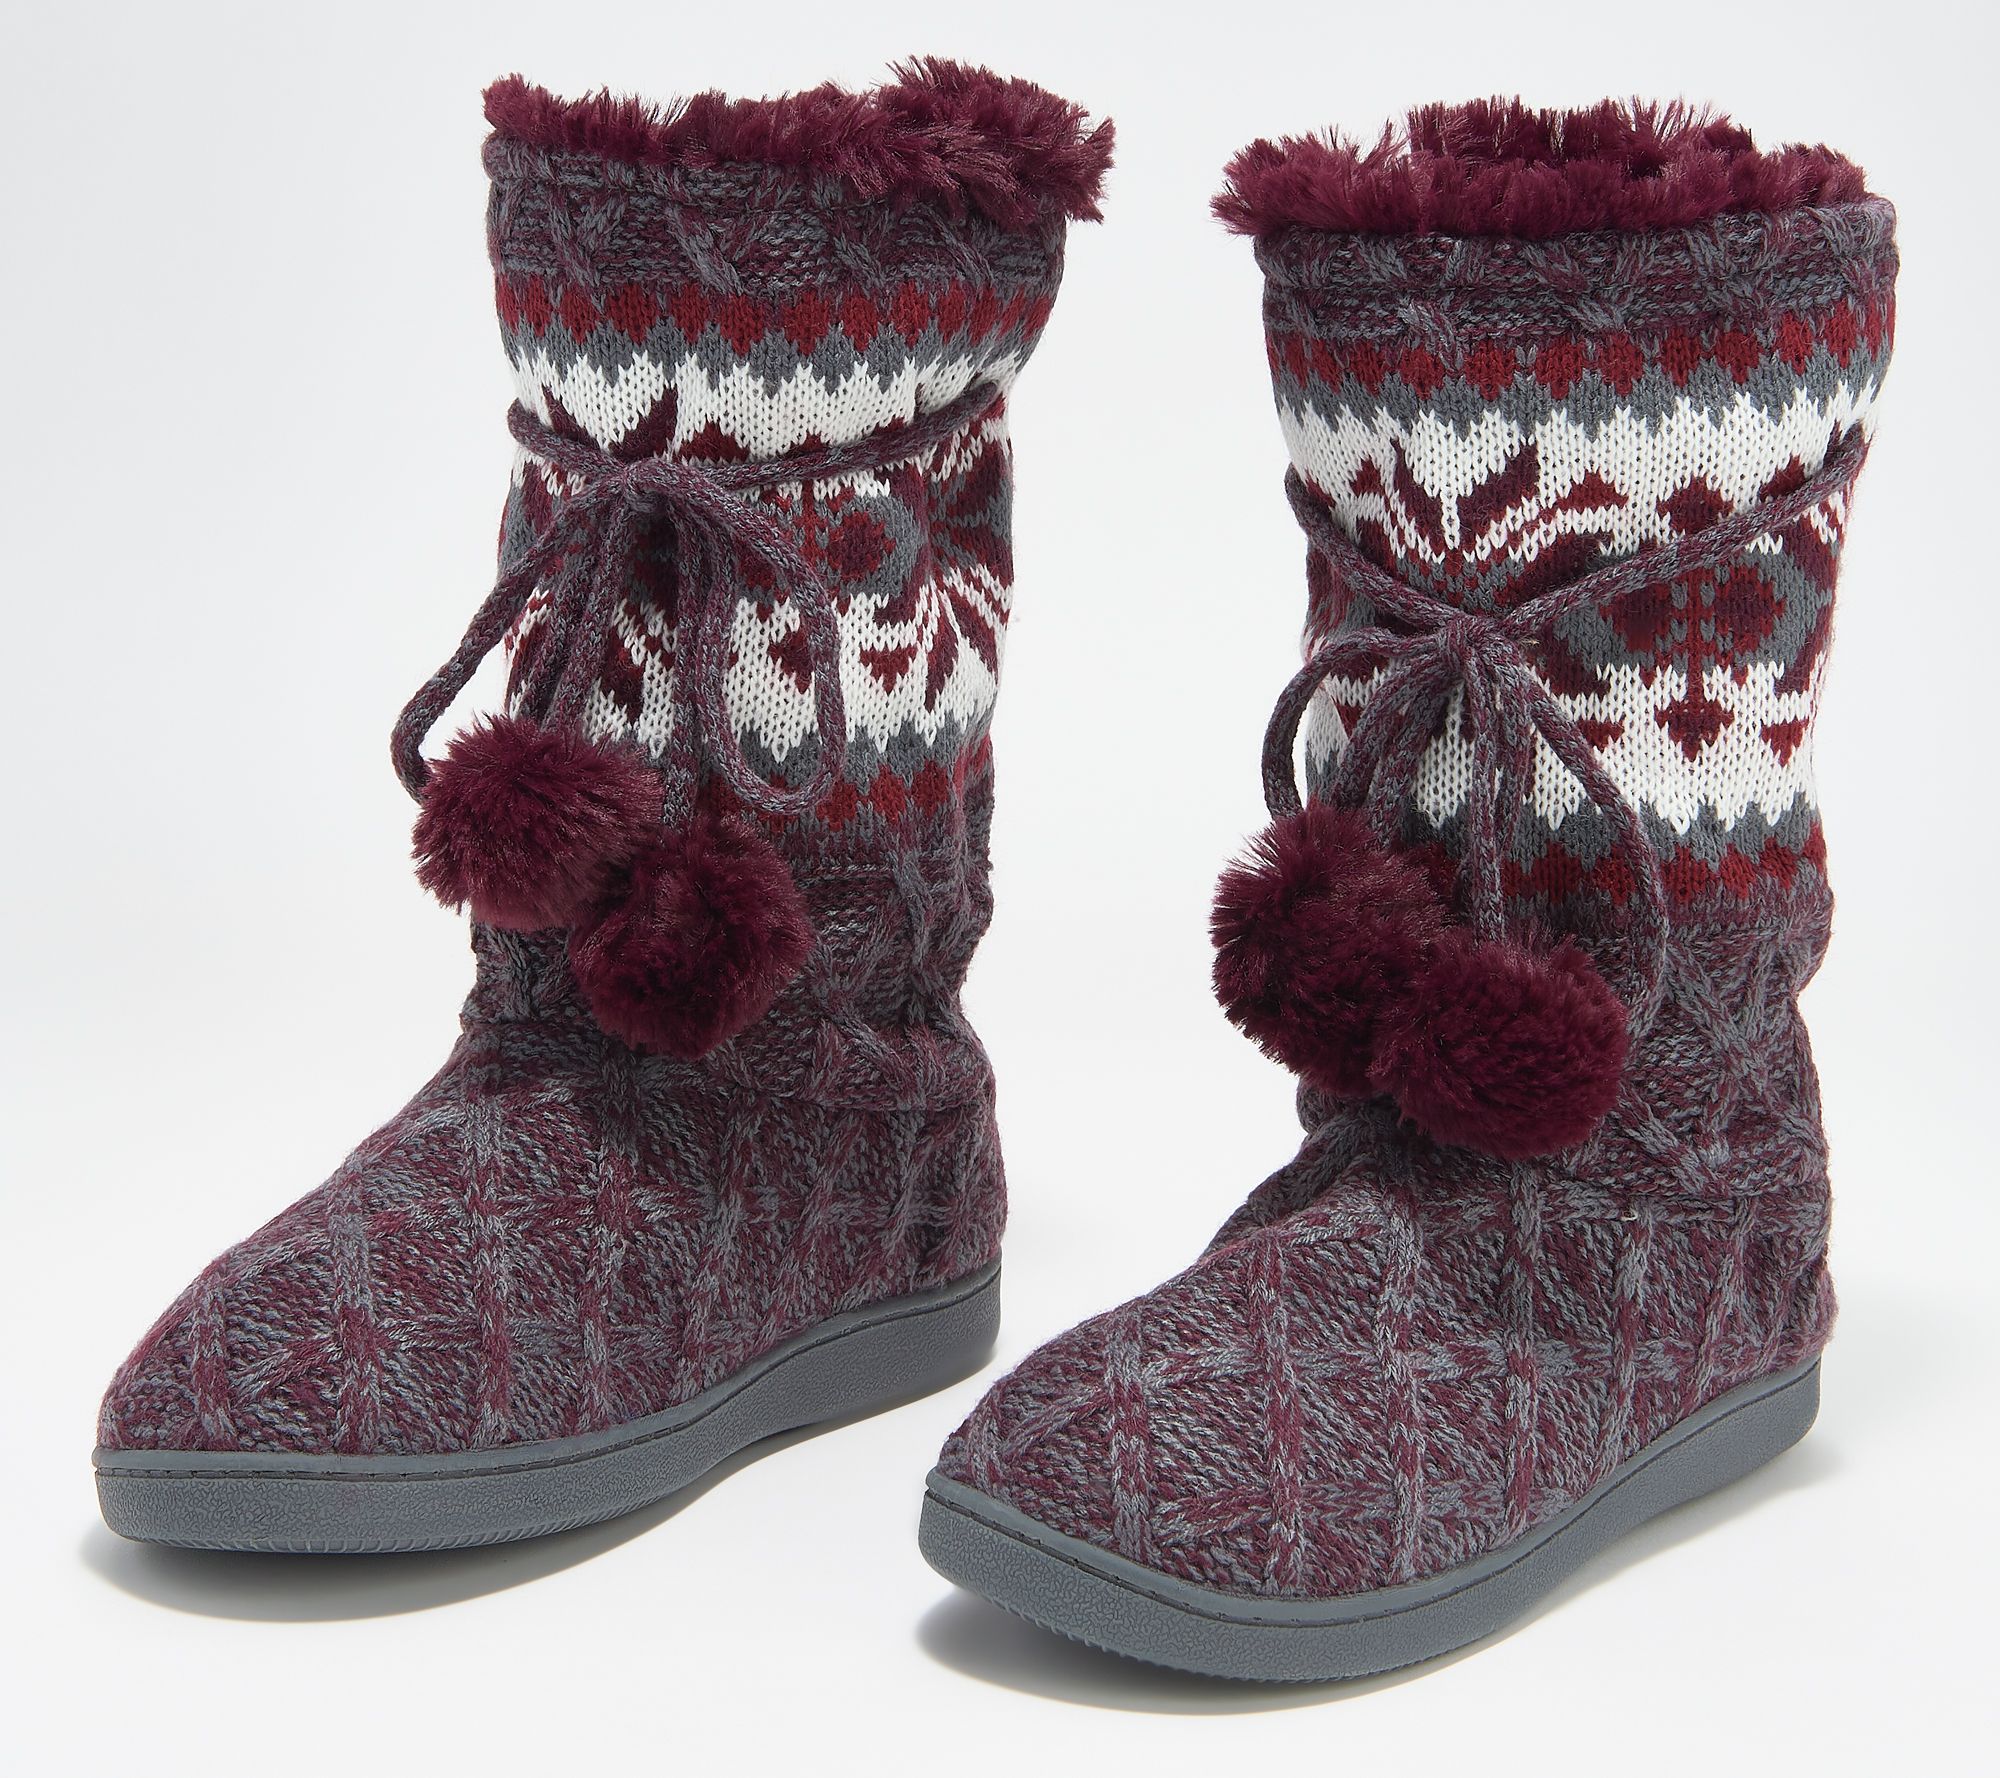 MUK LUKS Gracie Tall Slippers Boot with Faux Fur Poms 